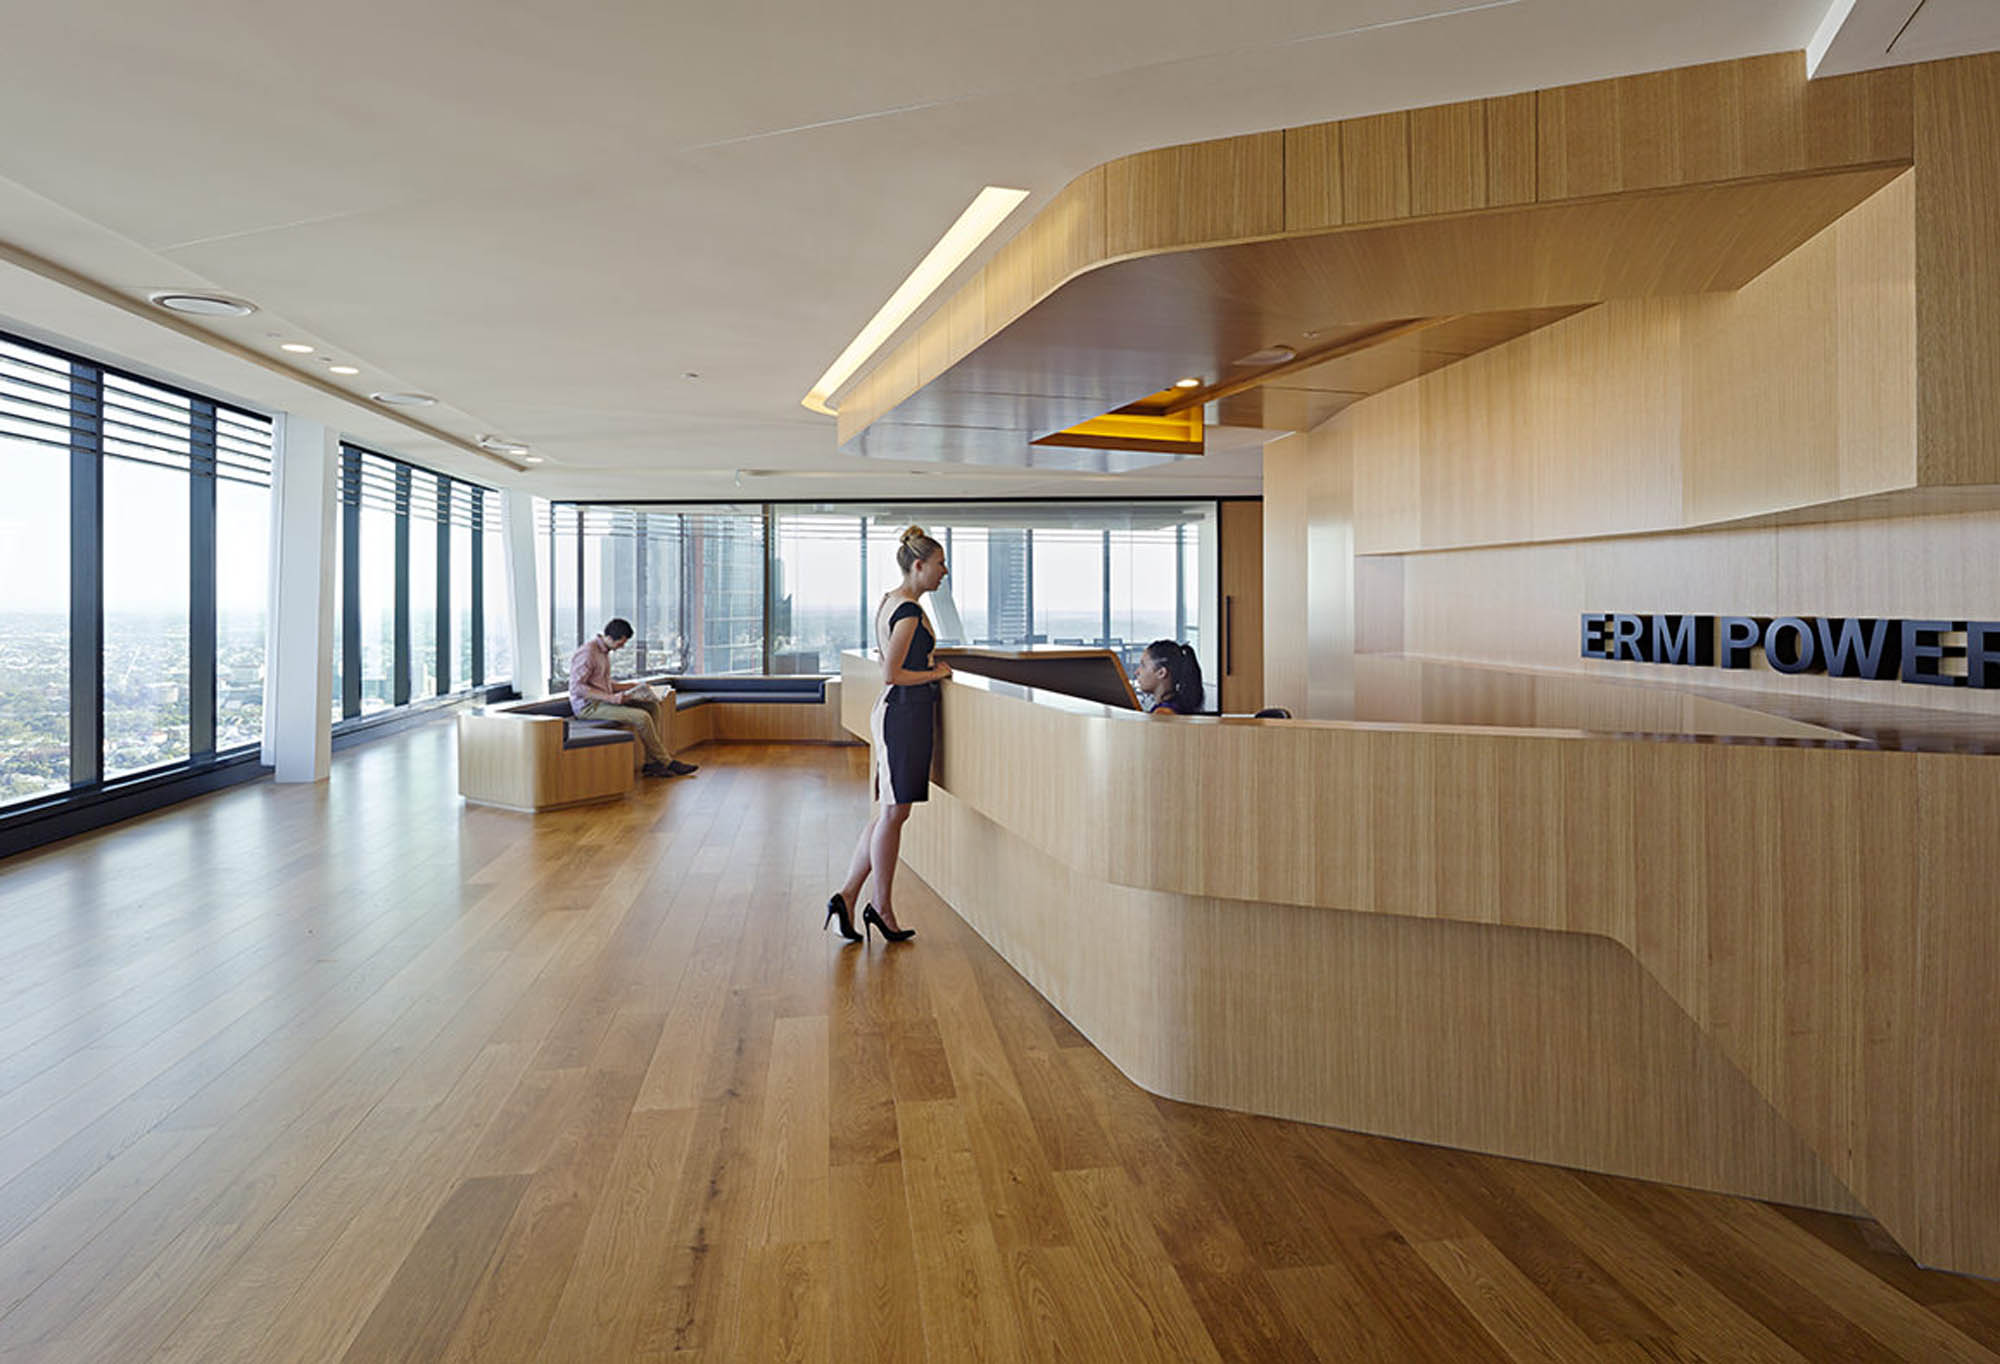 carousel erm power brisbane fitout office reception highrise timber